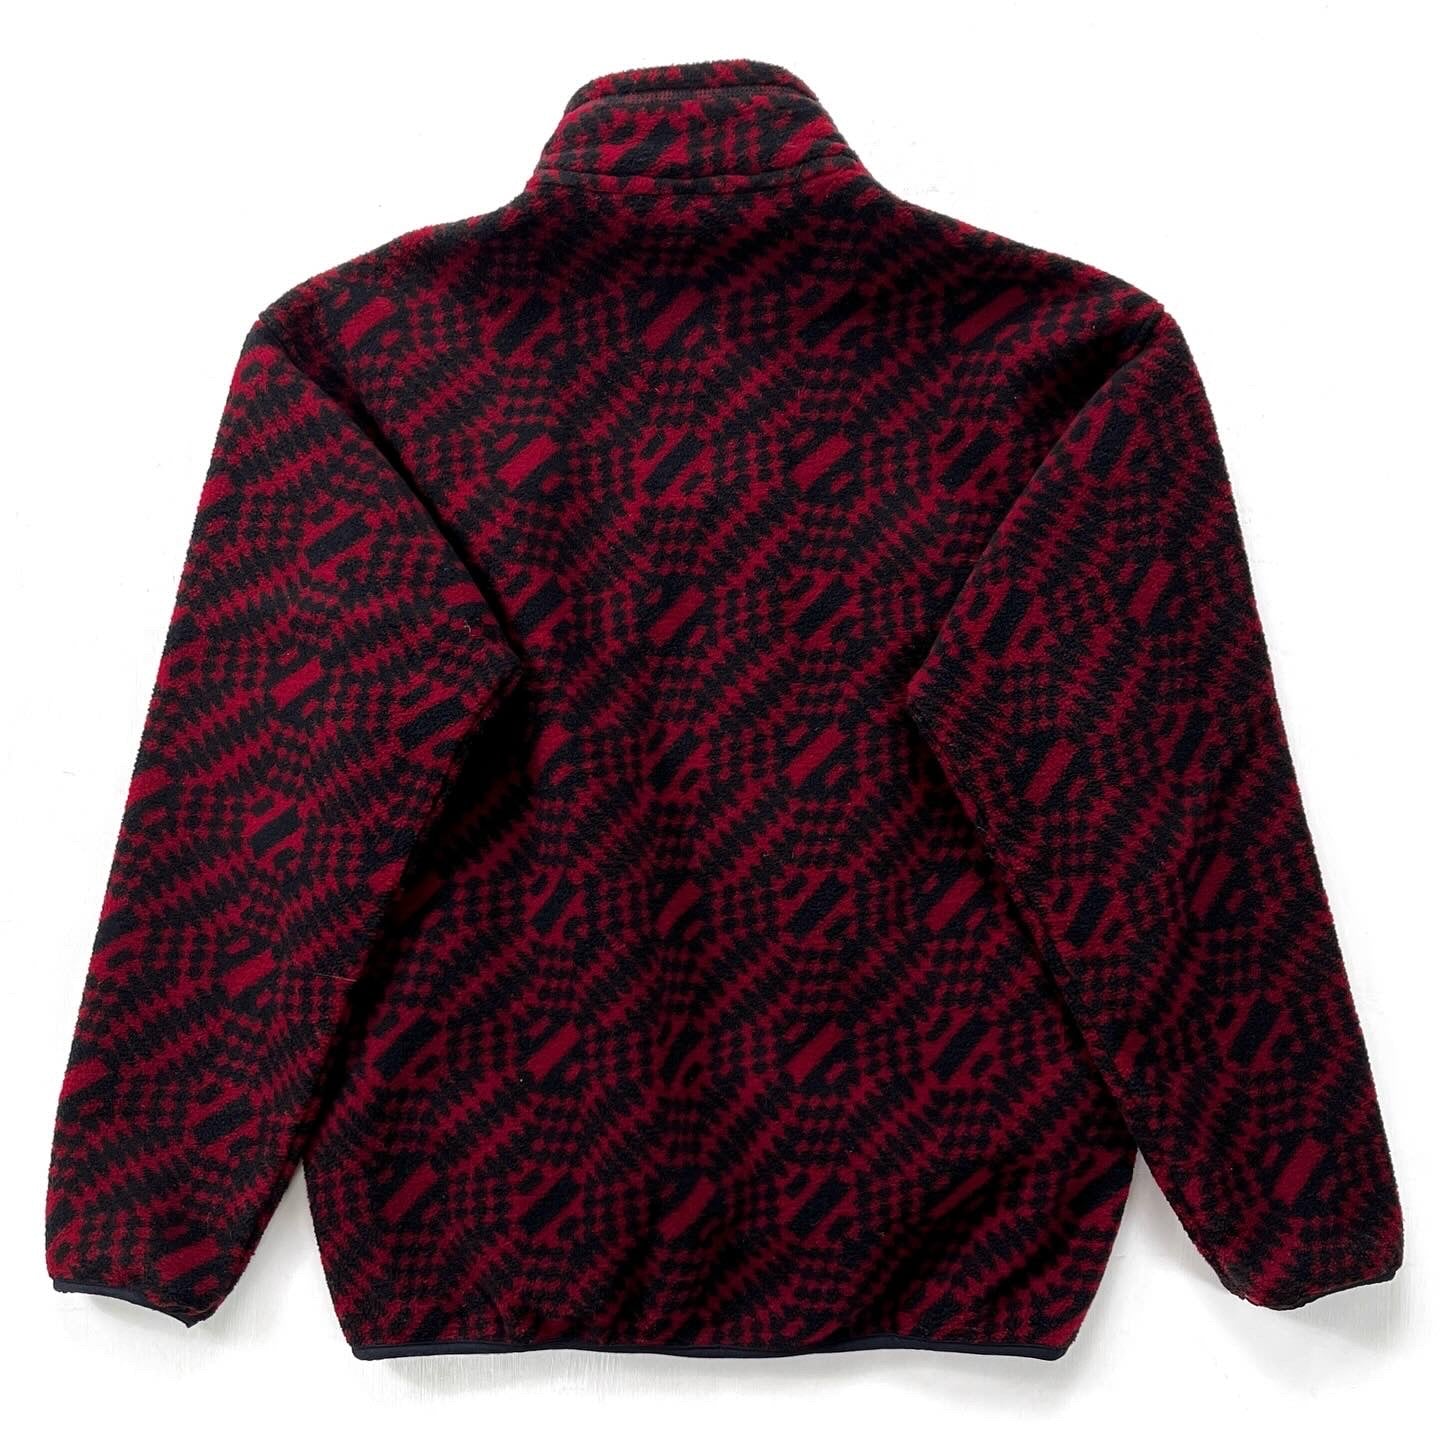 1998 Patagonia Printed Synchilla Snap-T, P’op: Black & Red (M)